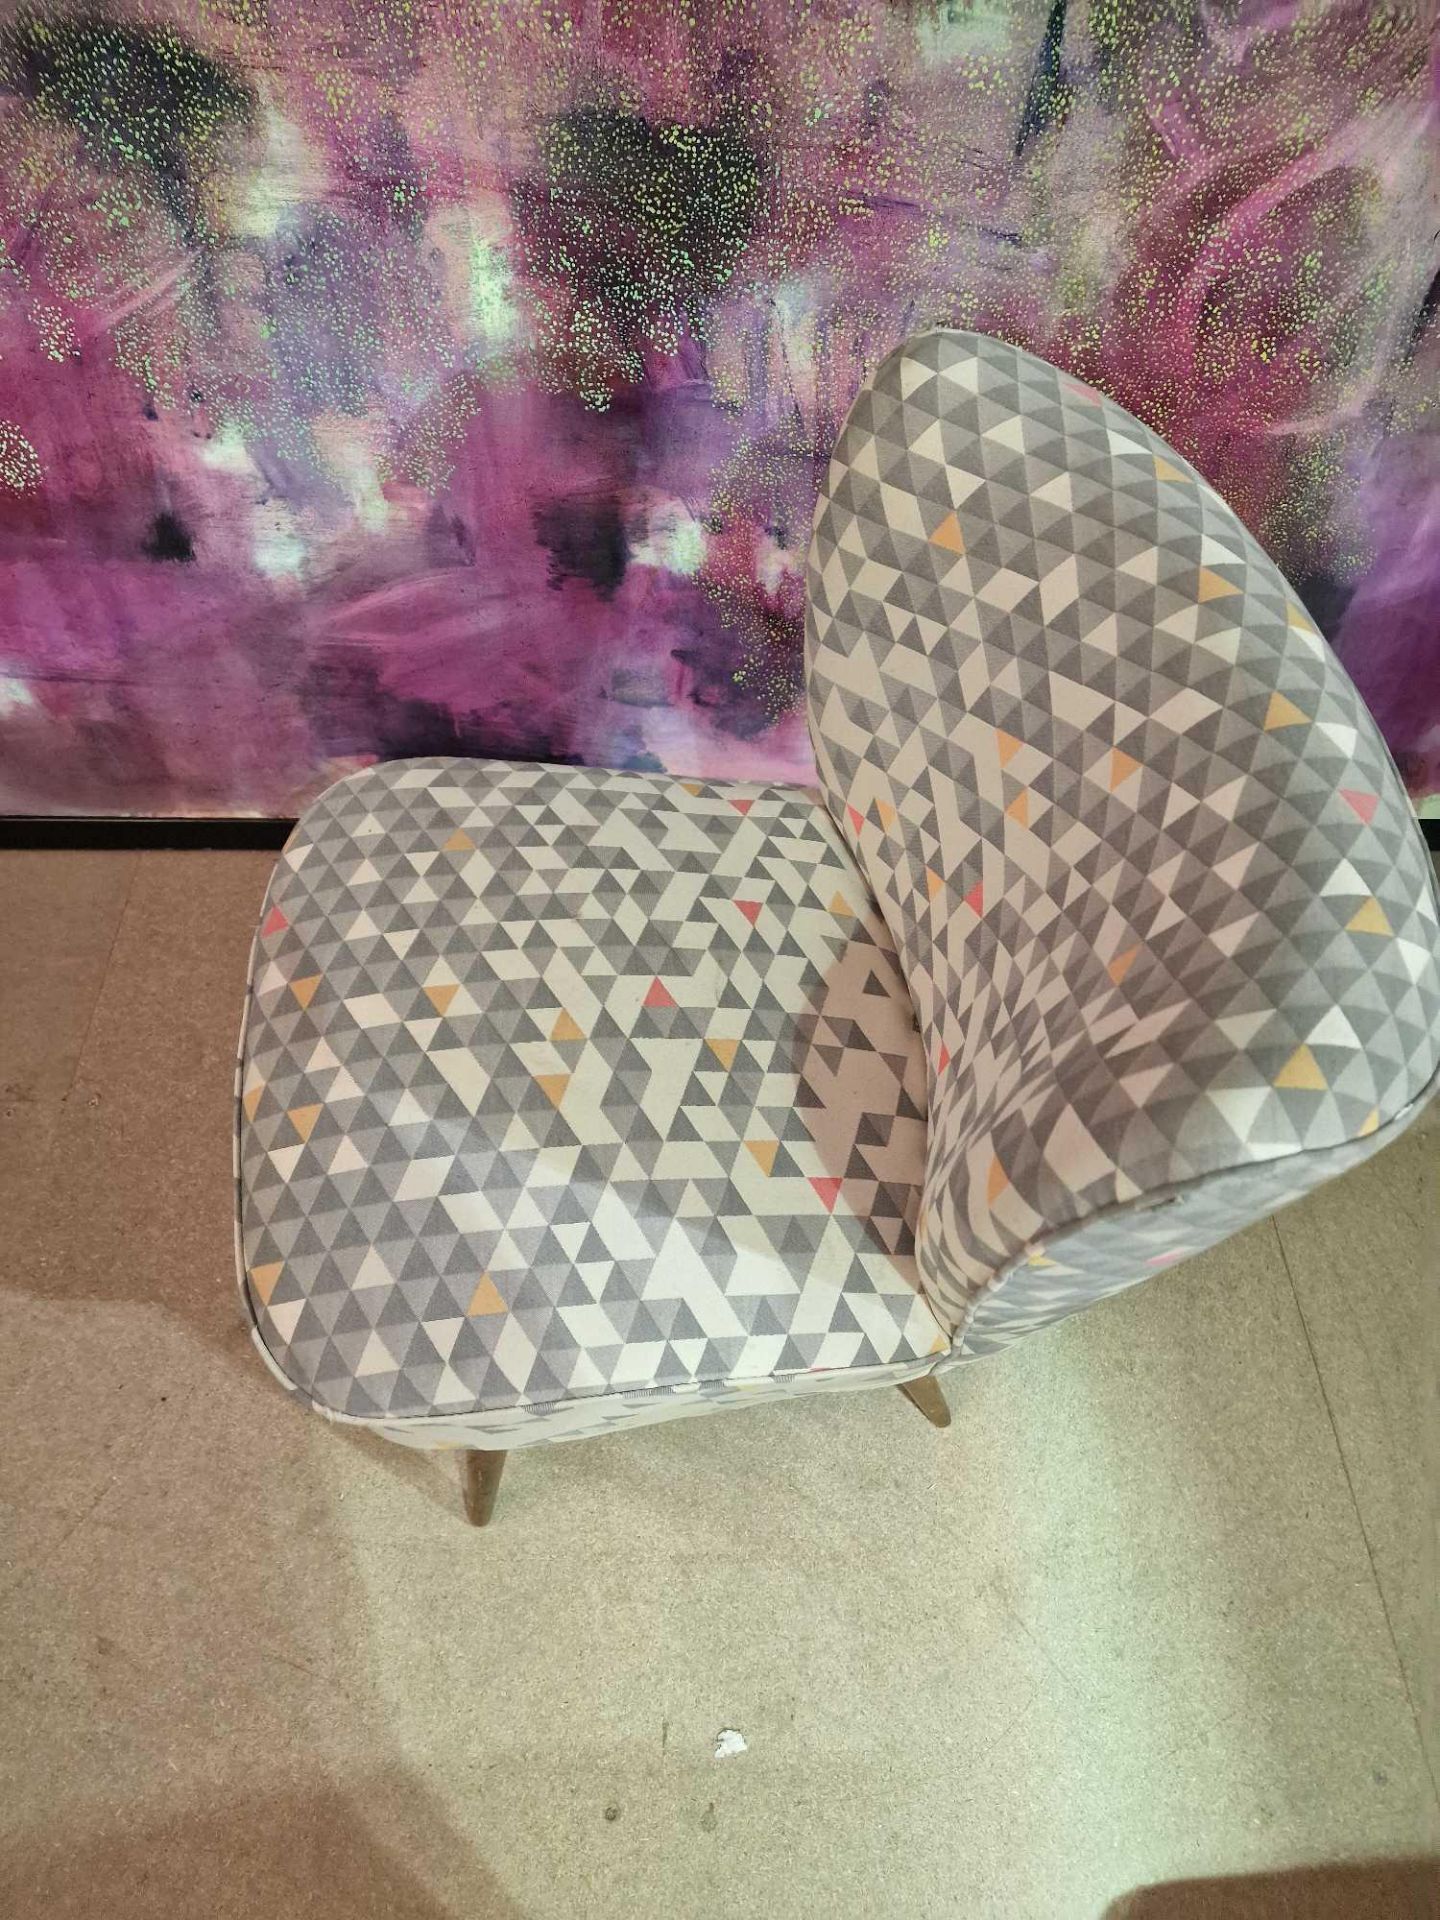 Slipper chair by Self Style Steeped in luxury, the geometric pattern upholstered chair is an elegant